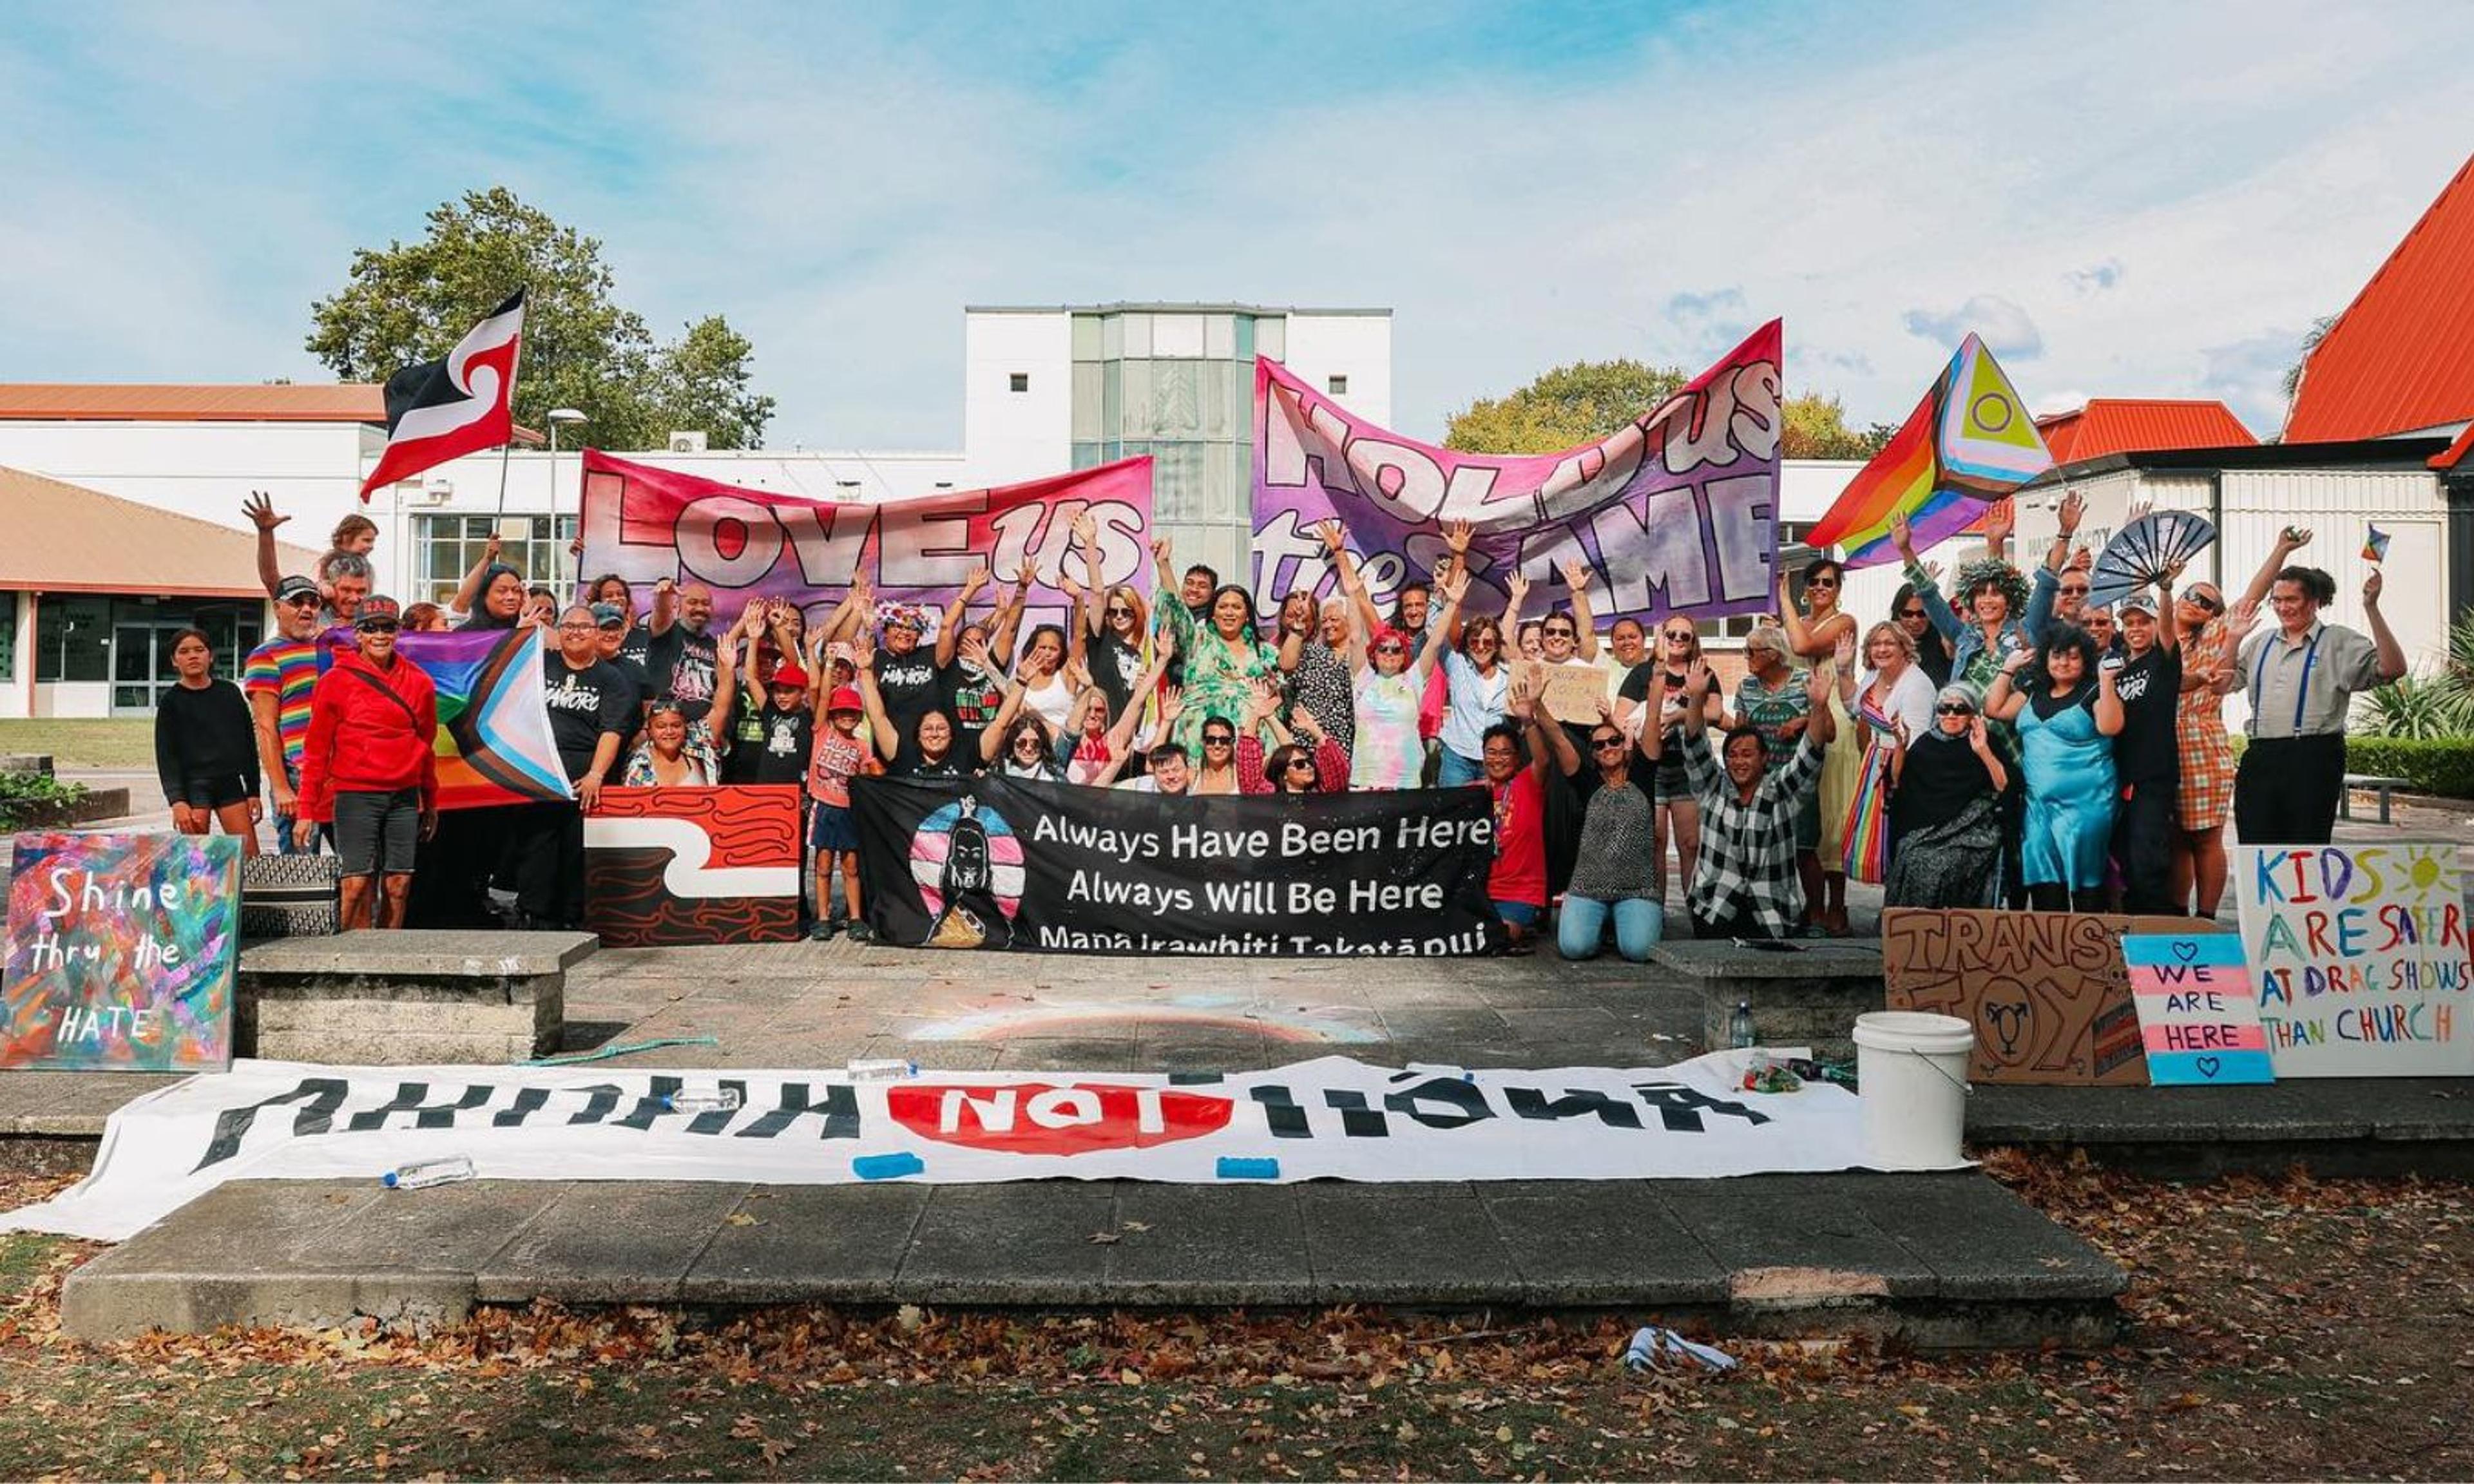 The Rainbow+ community in Hastings held a Peace and Love Action event to show unity amidst rising targeted attacks on rainbow communities in Aotearoa.